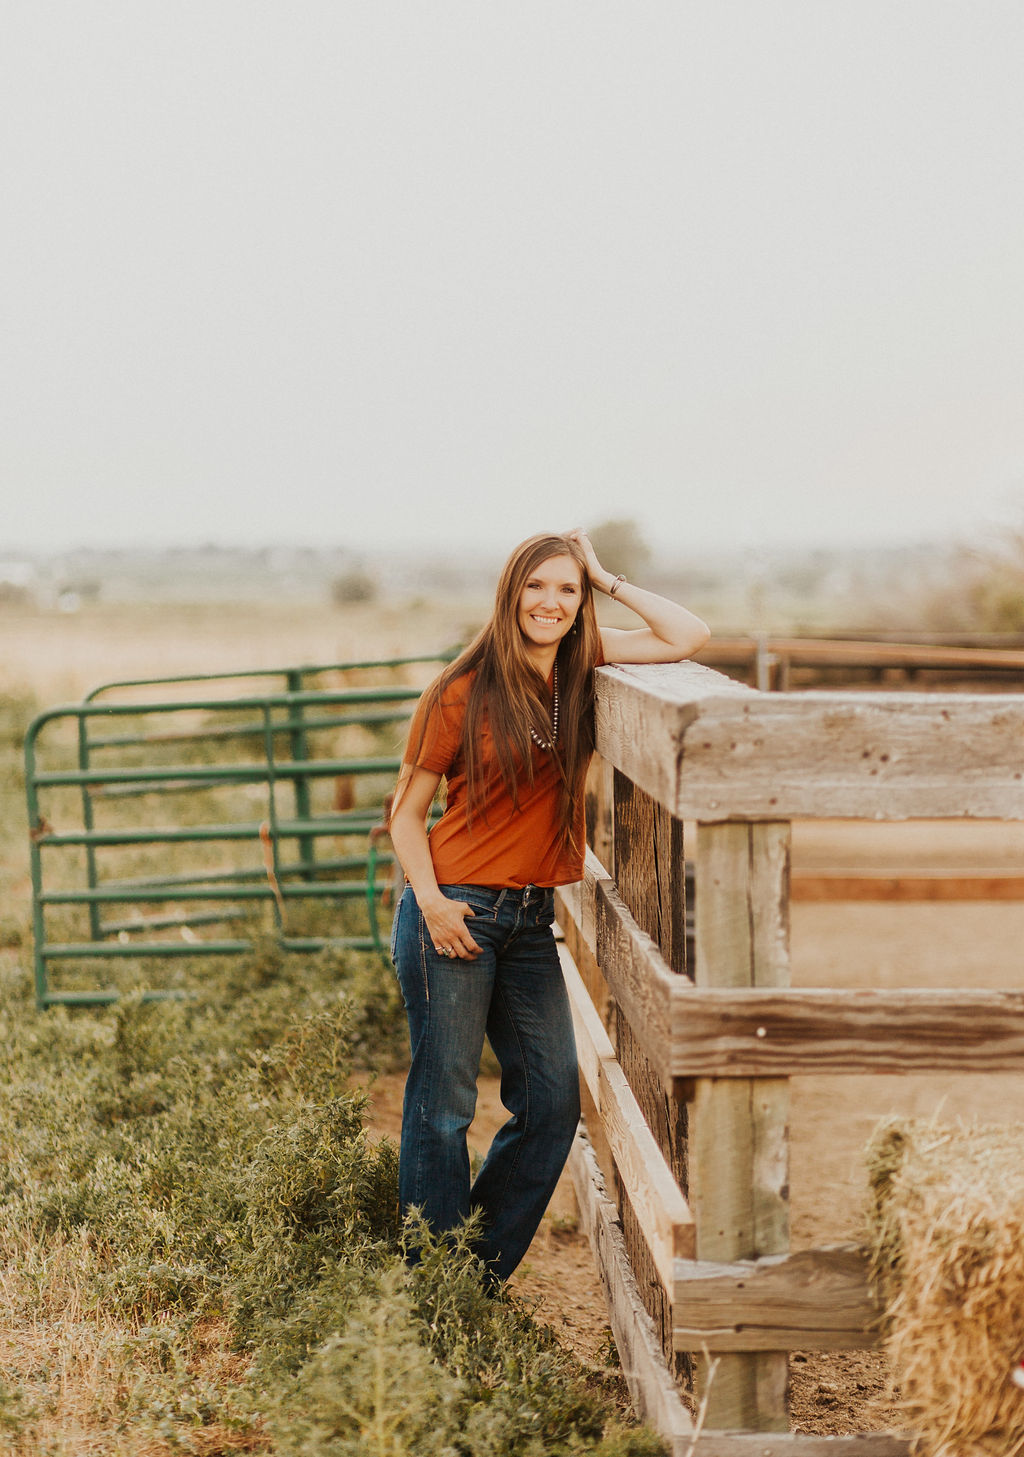 Smiling and happy woman with long brown hair leaning on fence teaching small businesses an SEO strategy for sustainable growth